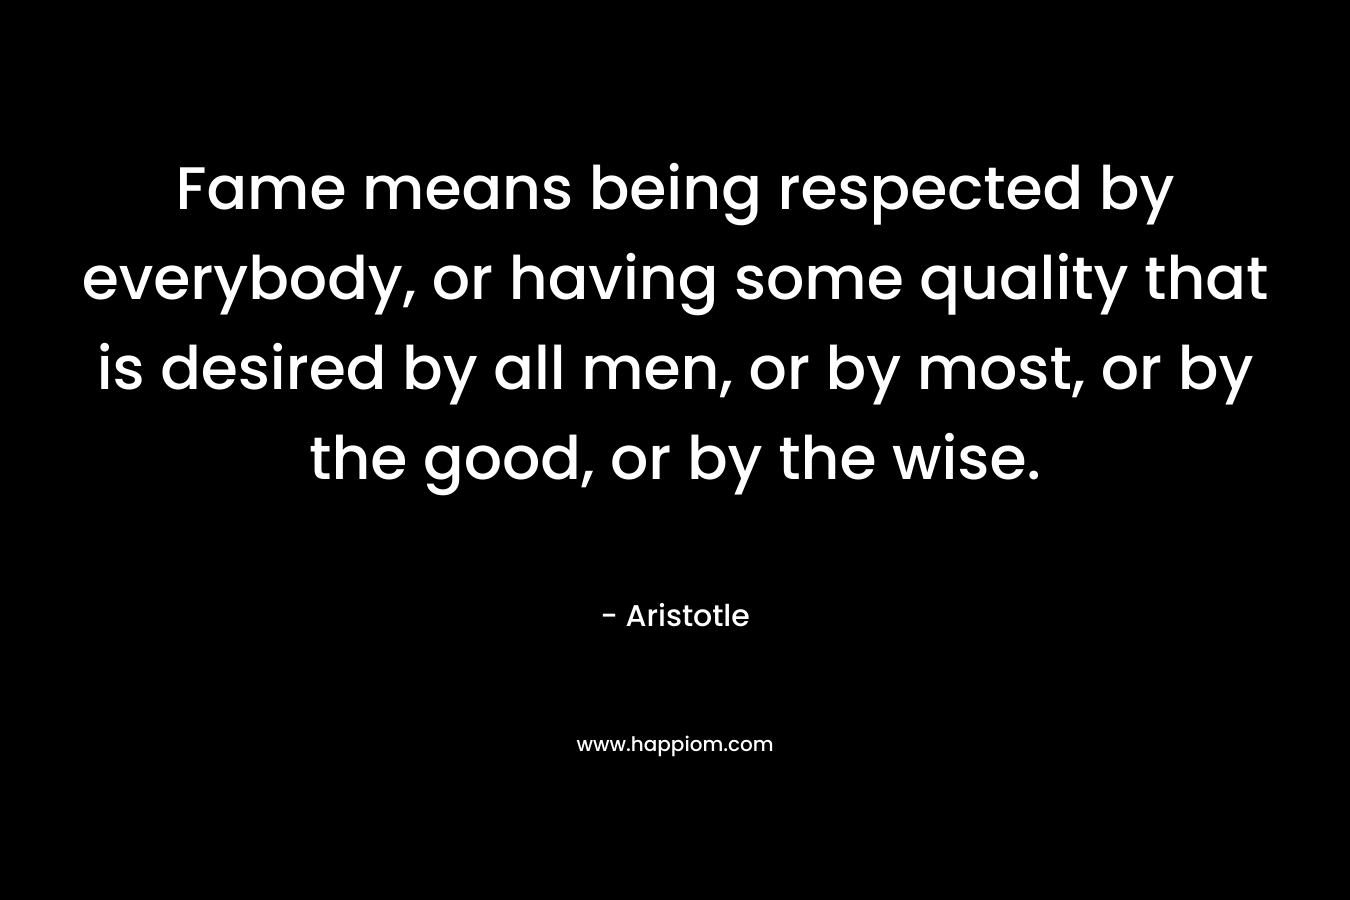 Fame means being respected by everybody, or having some quality that is desired by all men, or by most, or by the good, or by the wise. – Aristotle